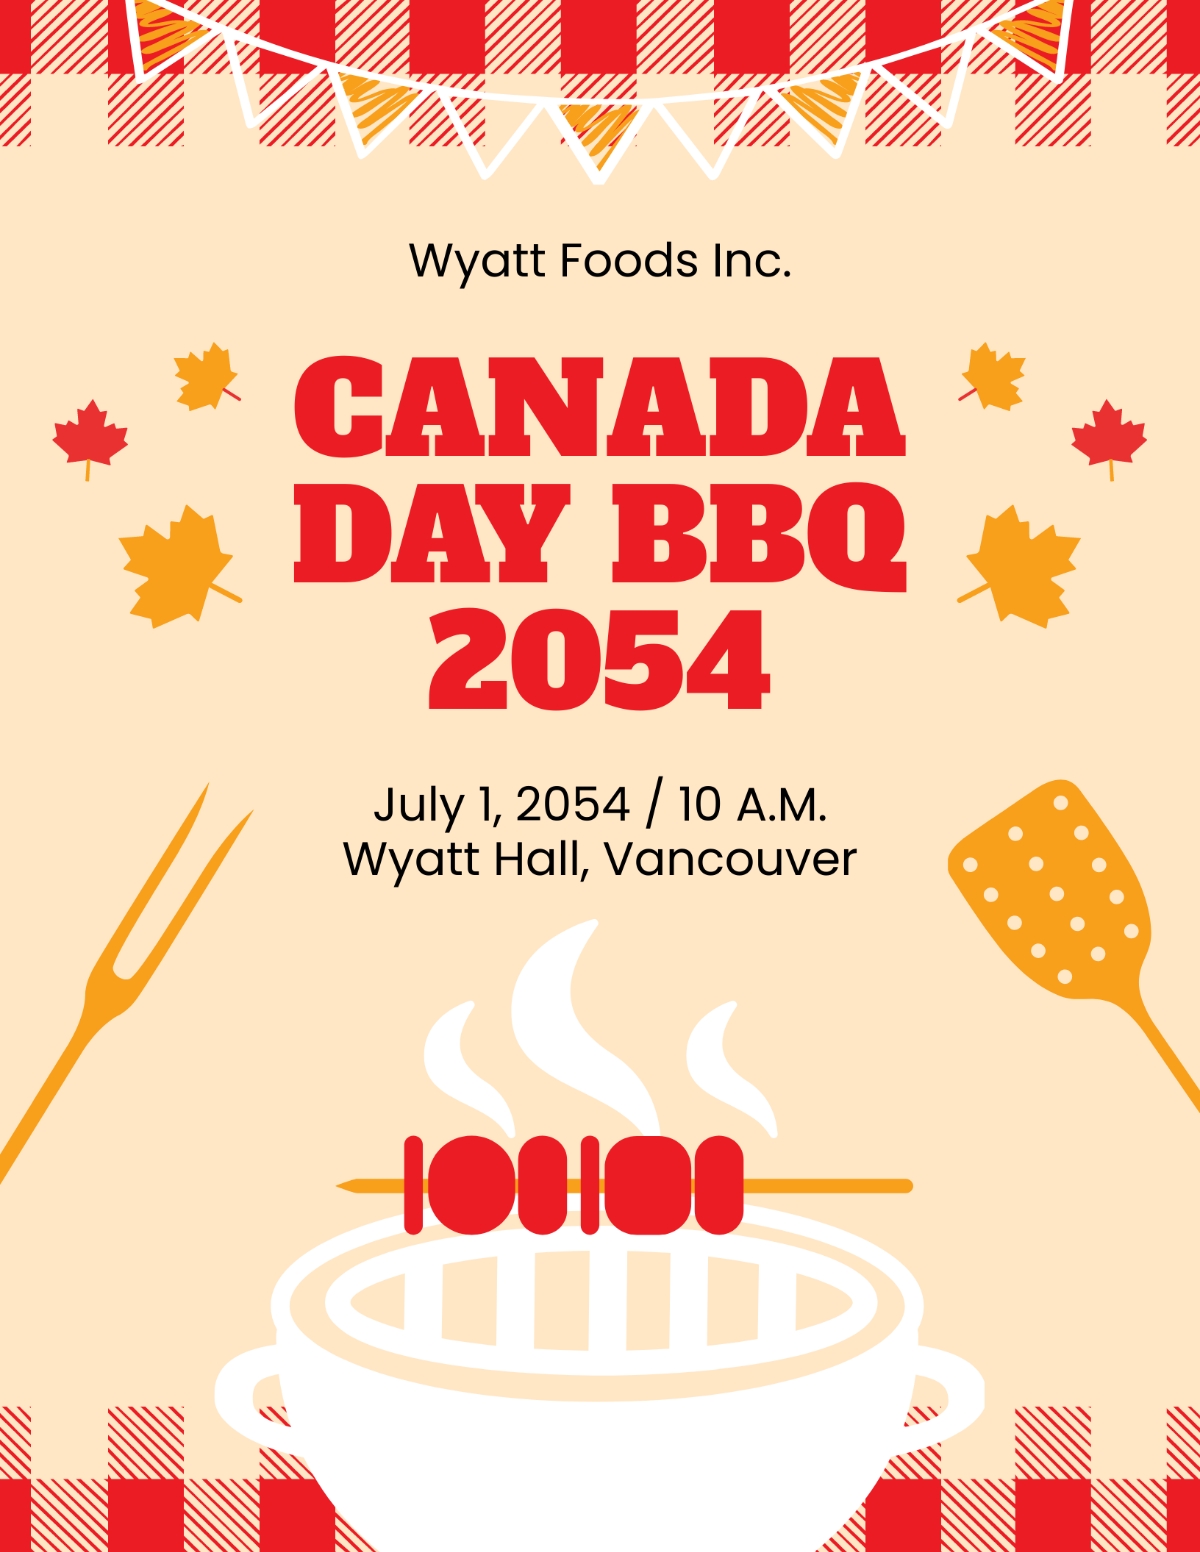 Free Canada Day Bbq Flyers Template